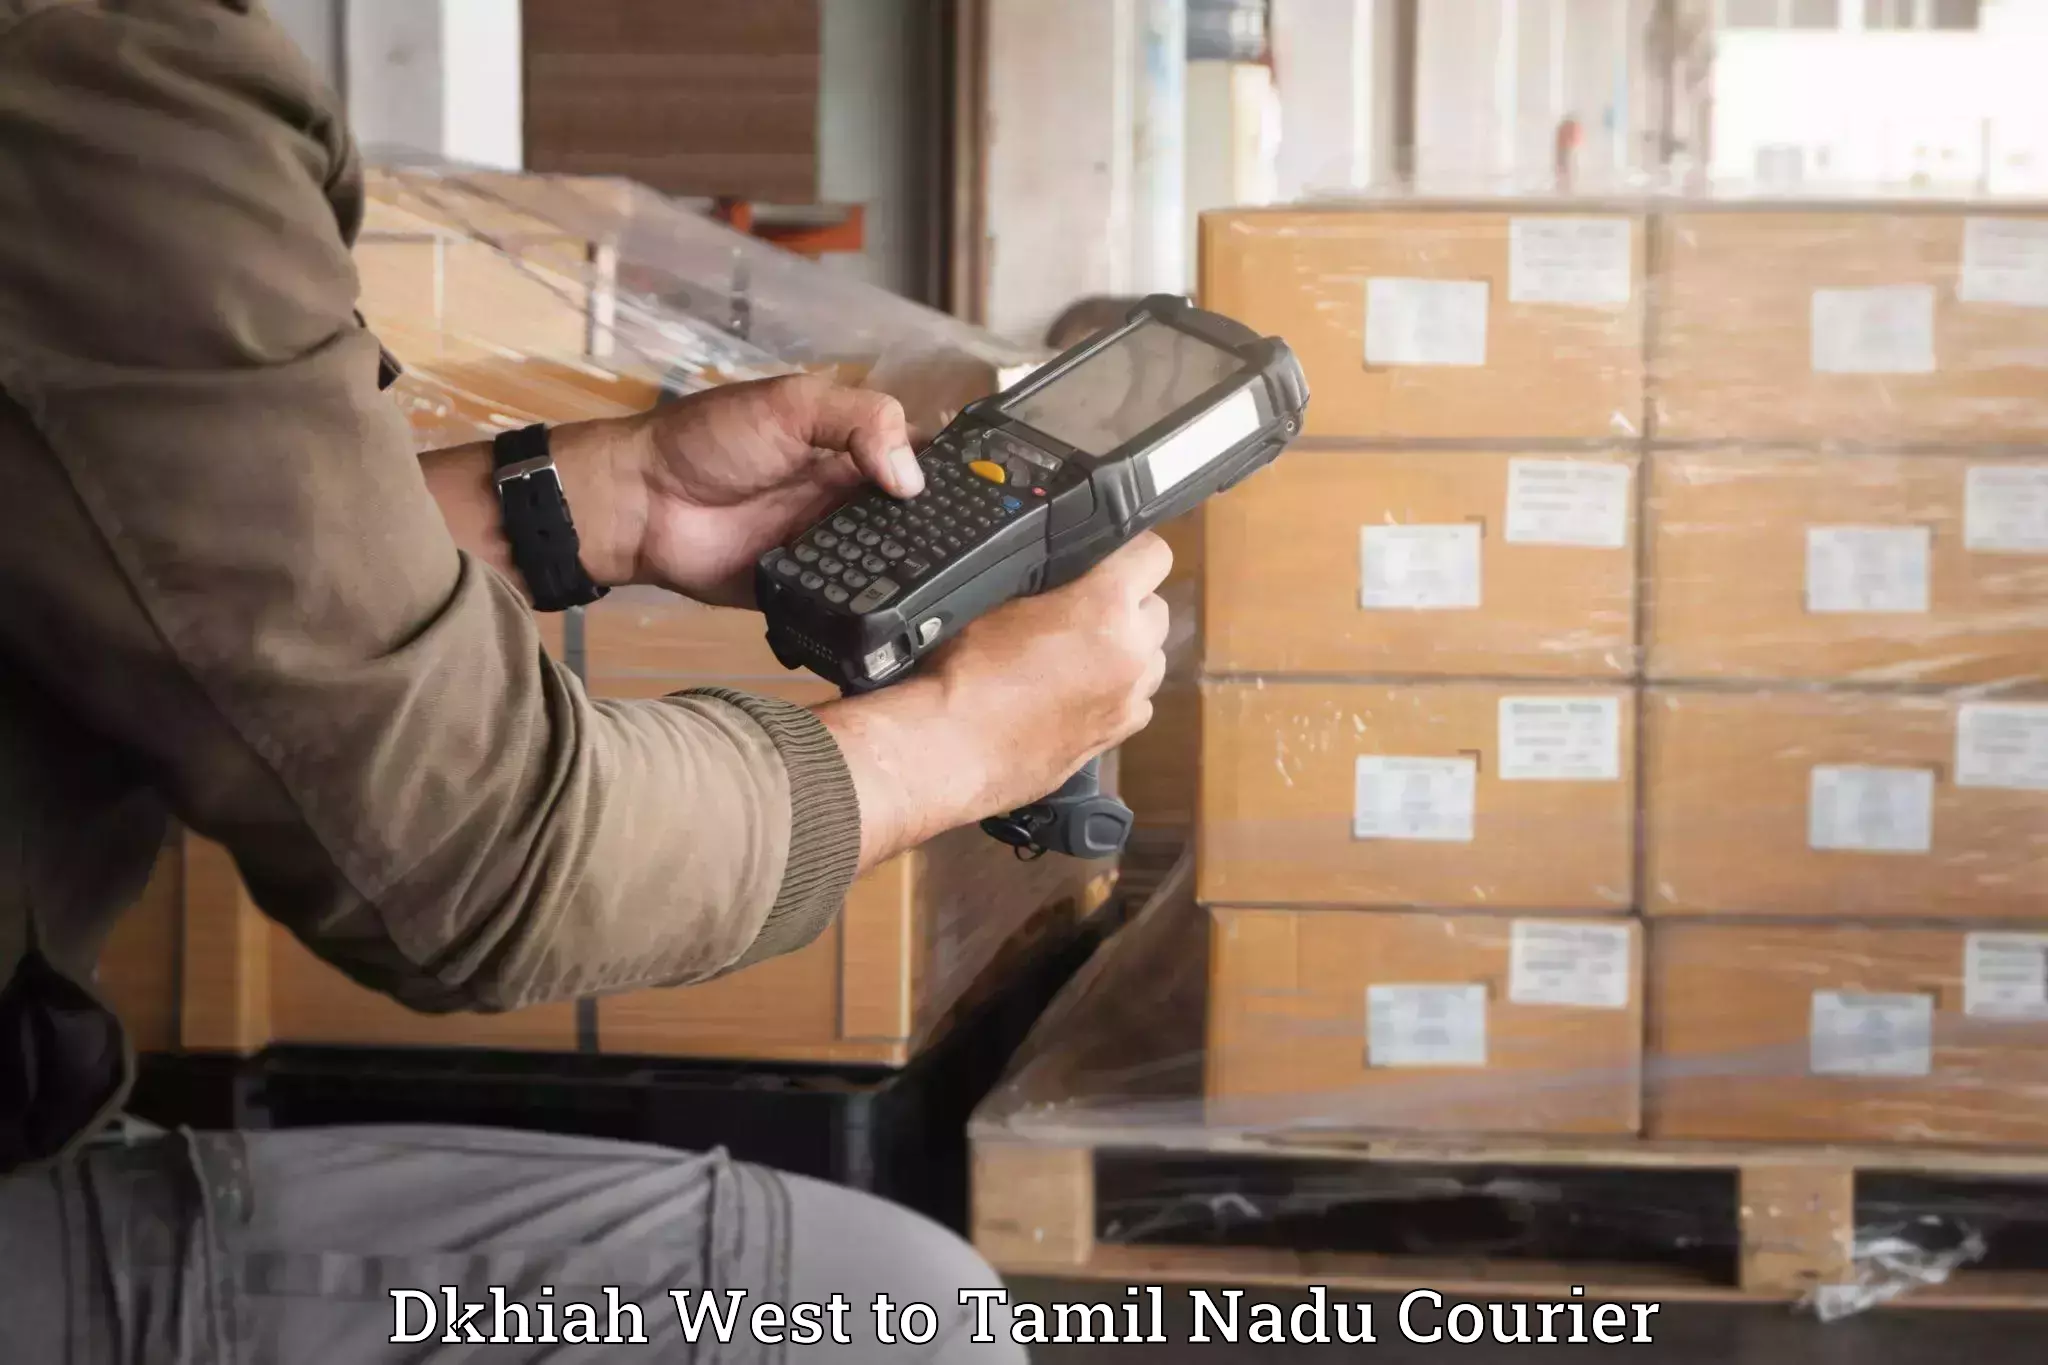 Baggage courier service Dkhiah West to The Gandhigram Rural Institute